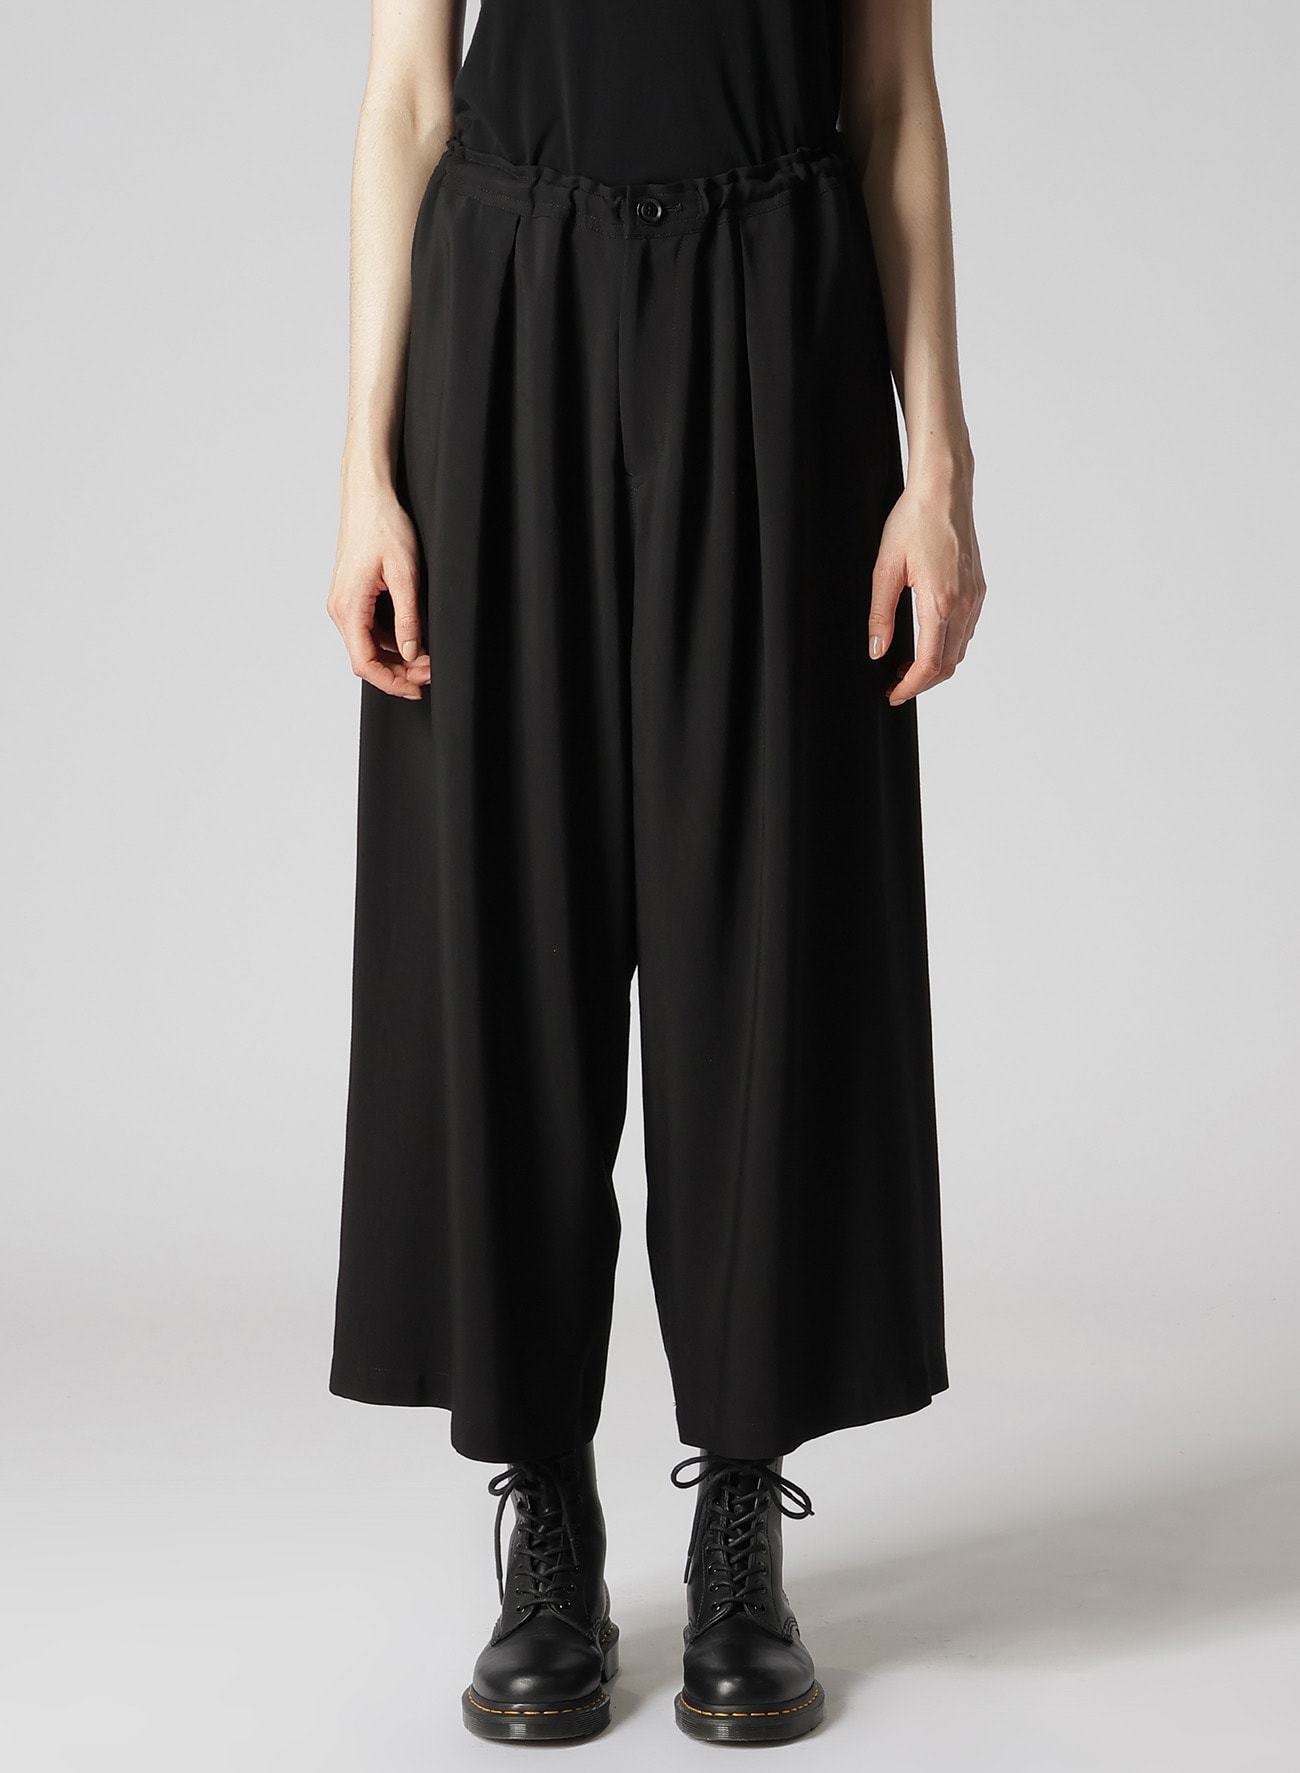 RAYON CUPRO FRONT TUCKED WIDE PANTS(XS Black): Y's｜THE SHOP YOHJI 